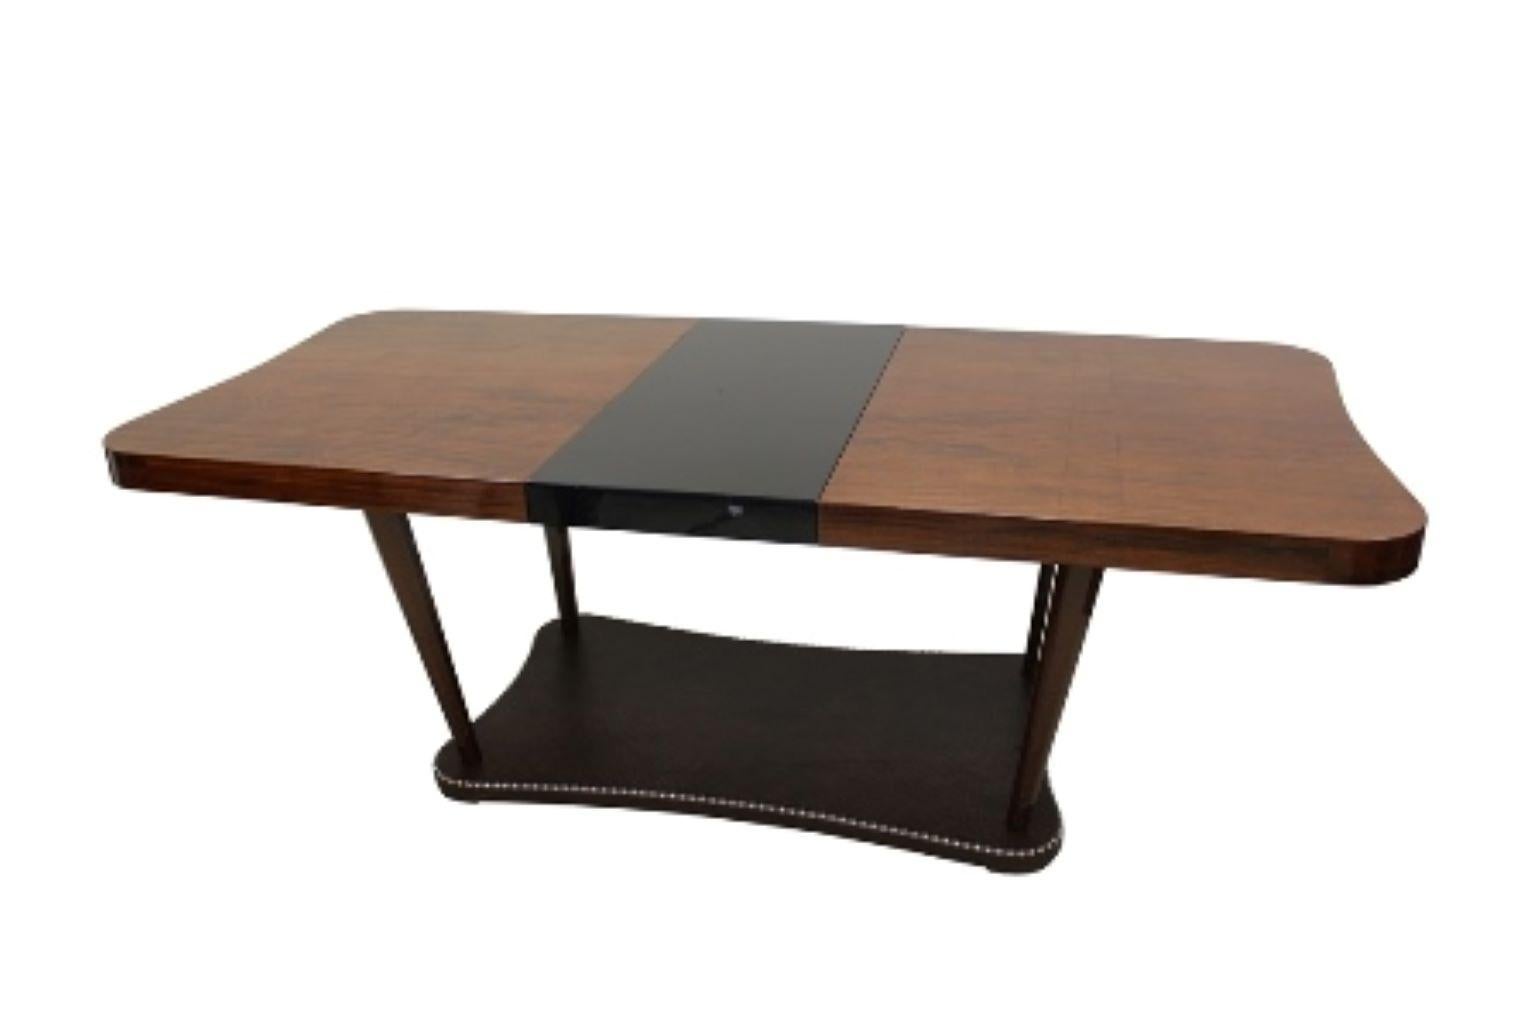 American Gilbert Rohde Art Deco Paldao Dining Table for Herman Miller